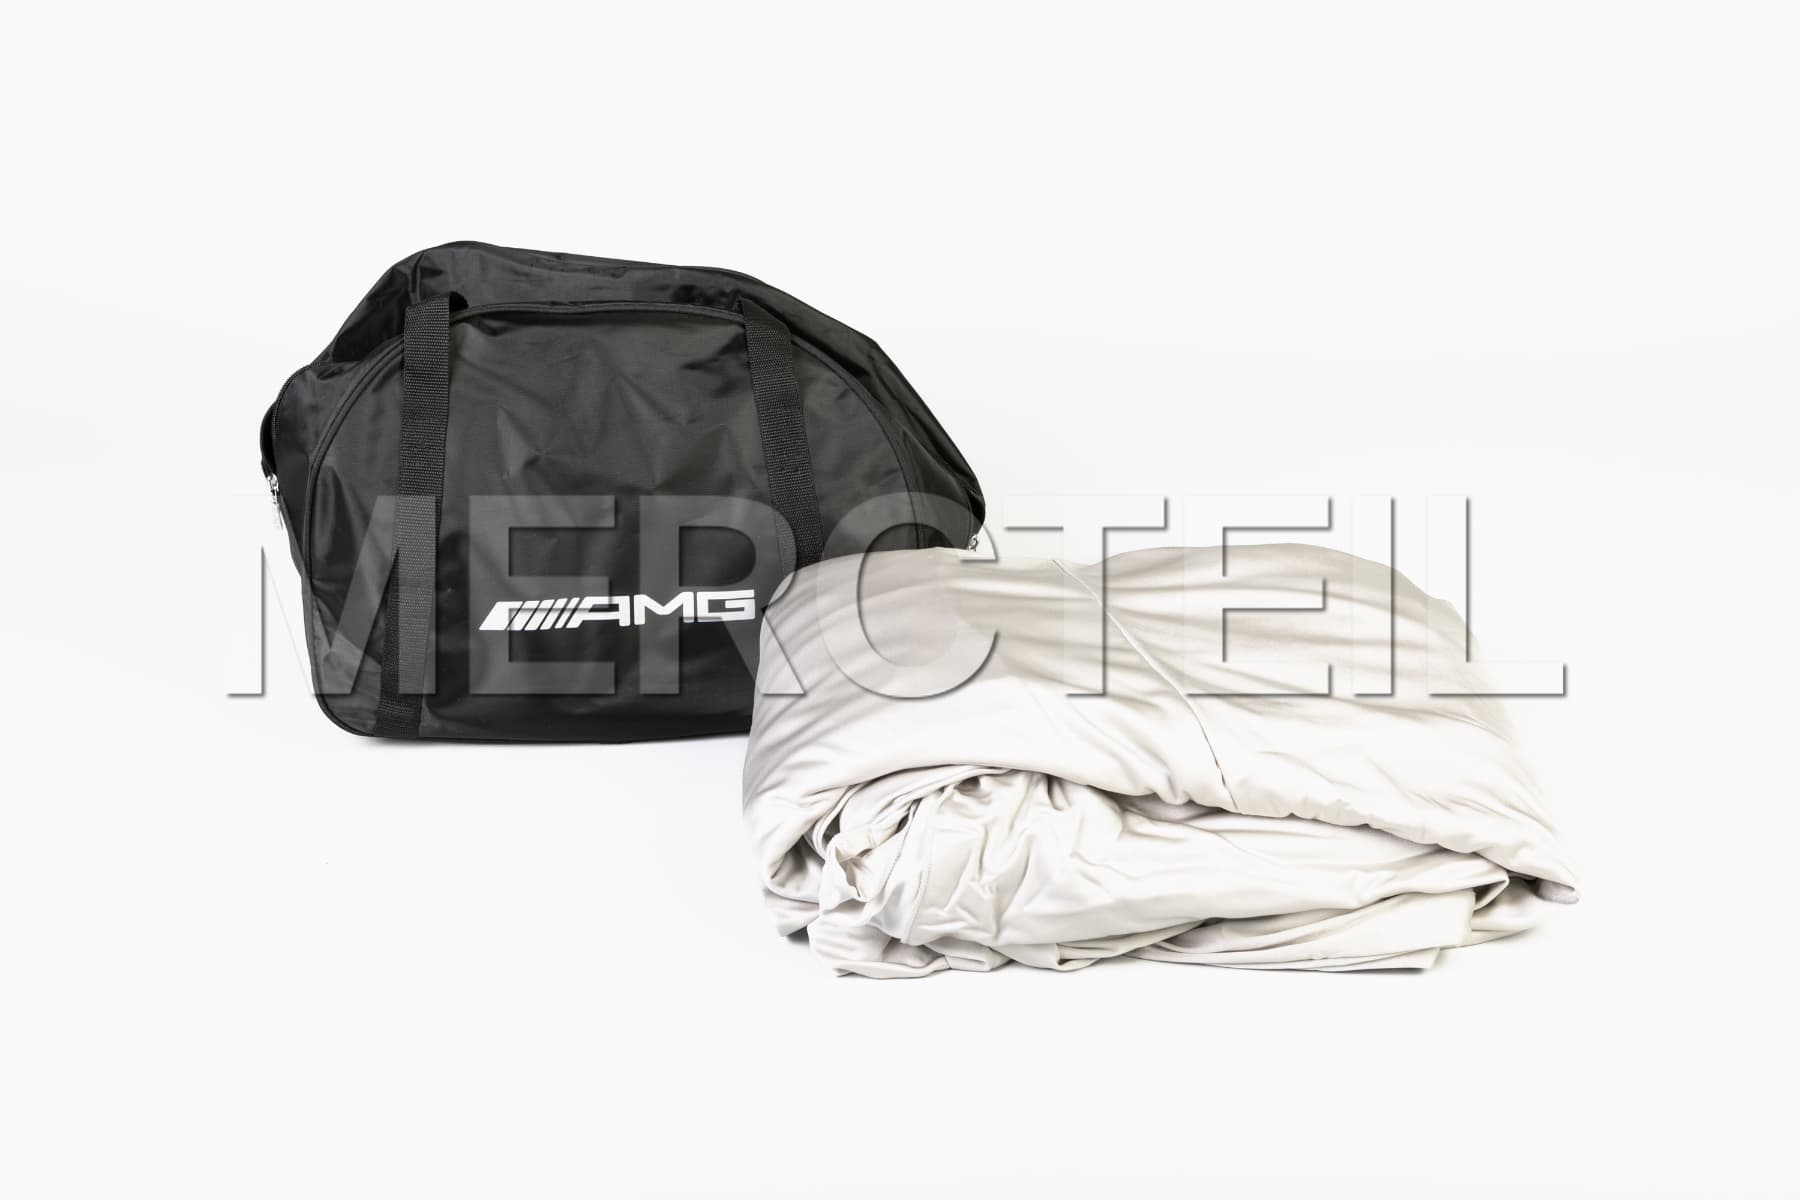 S-Class Cabrio AMG Indoor Cover 217 Genuine Mercedes-AMG (Part number: A2178990800)